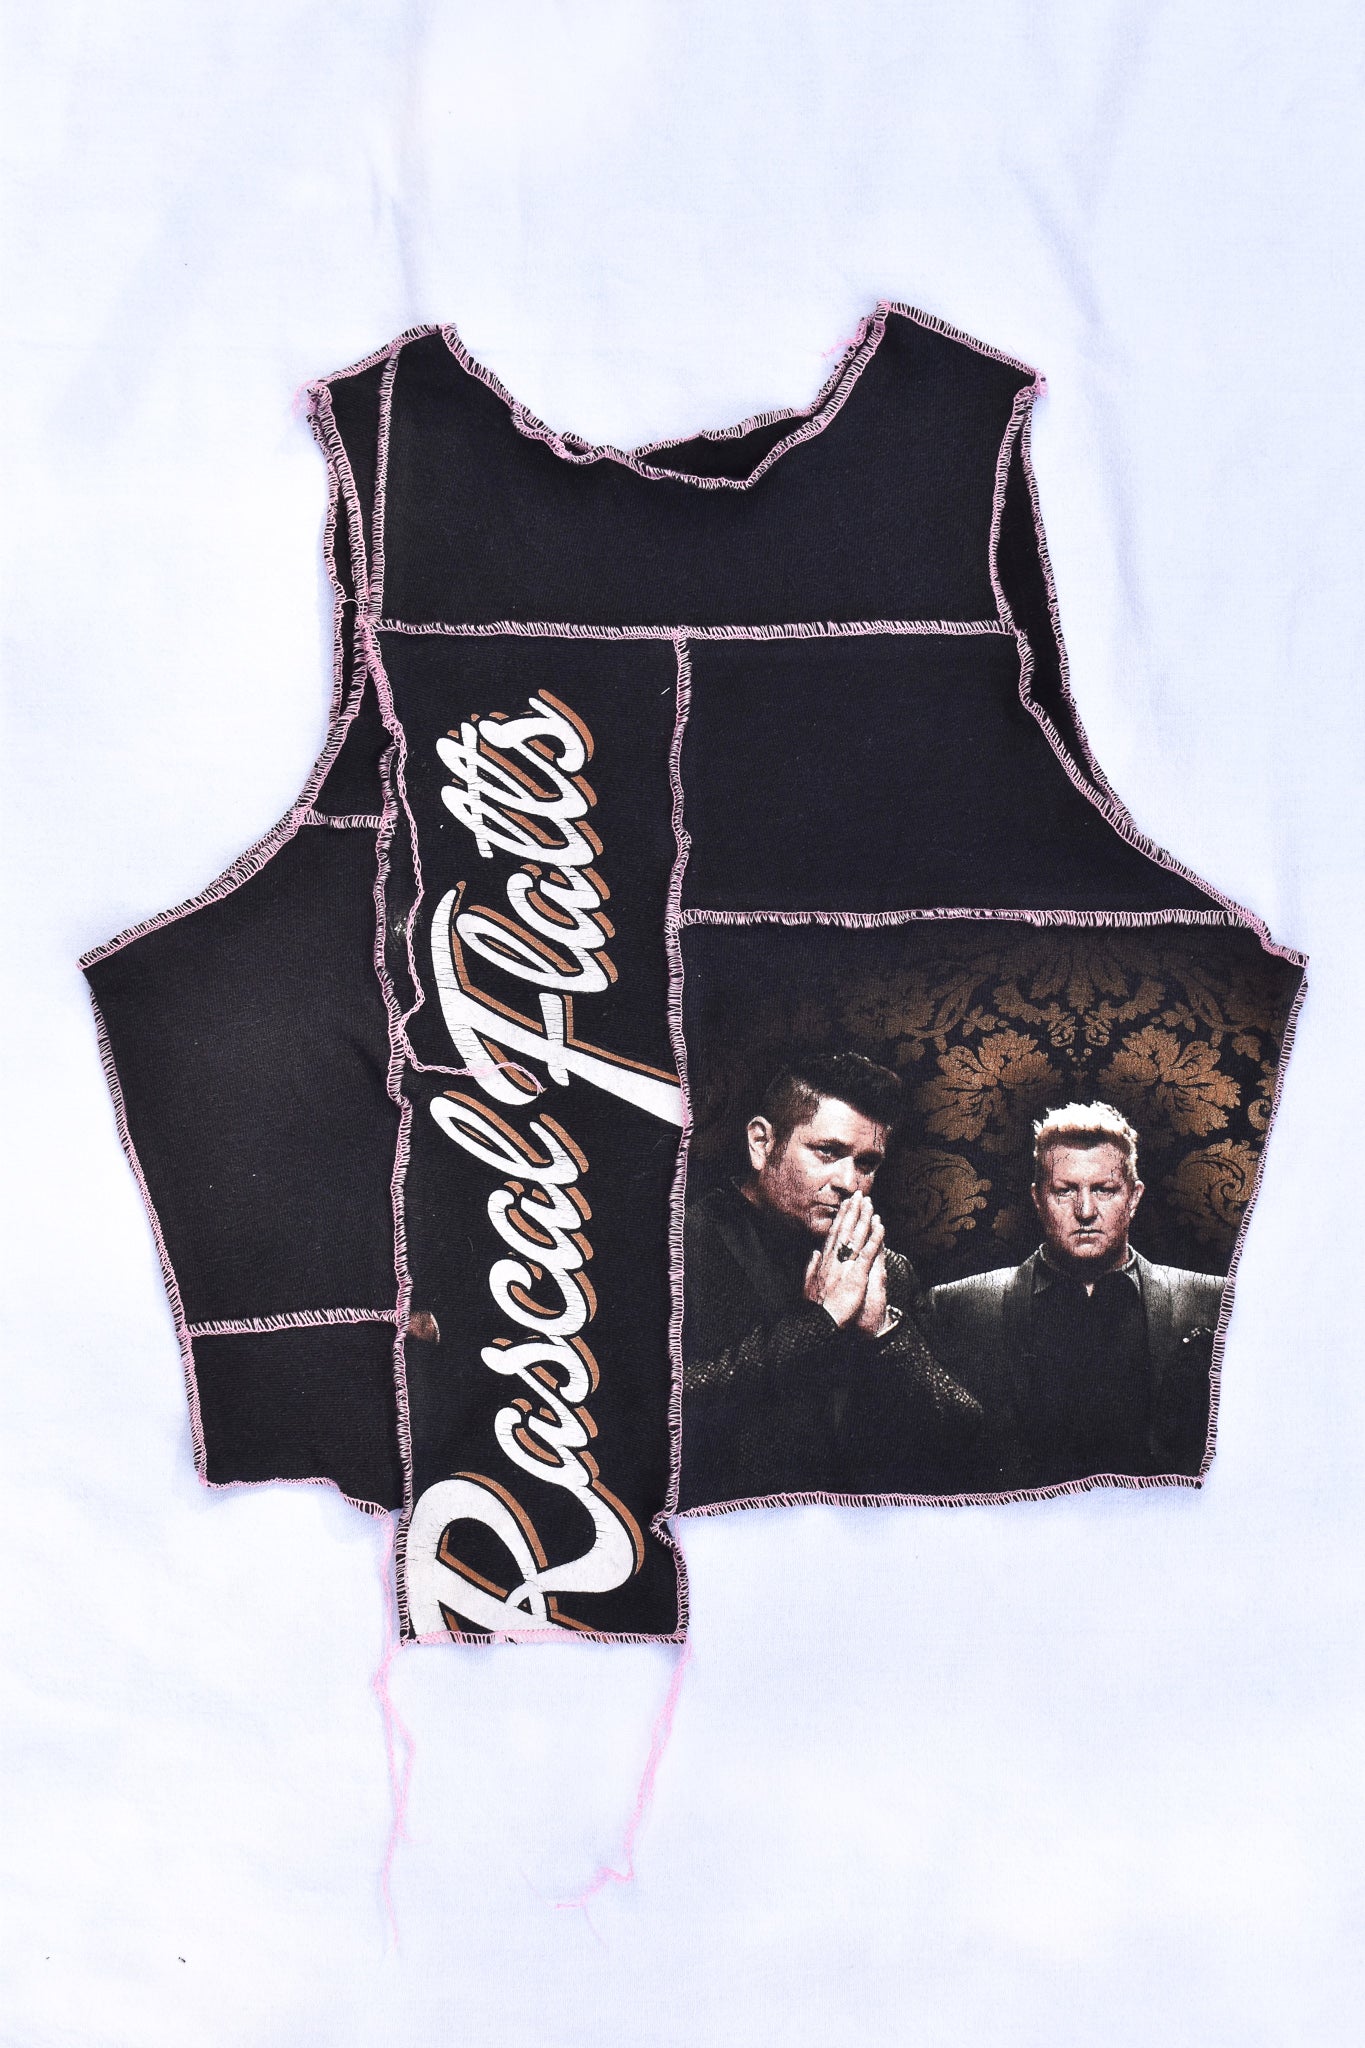 Upcycled Rascal Flatts Scrappy Top